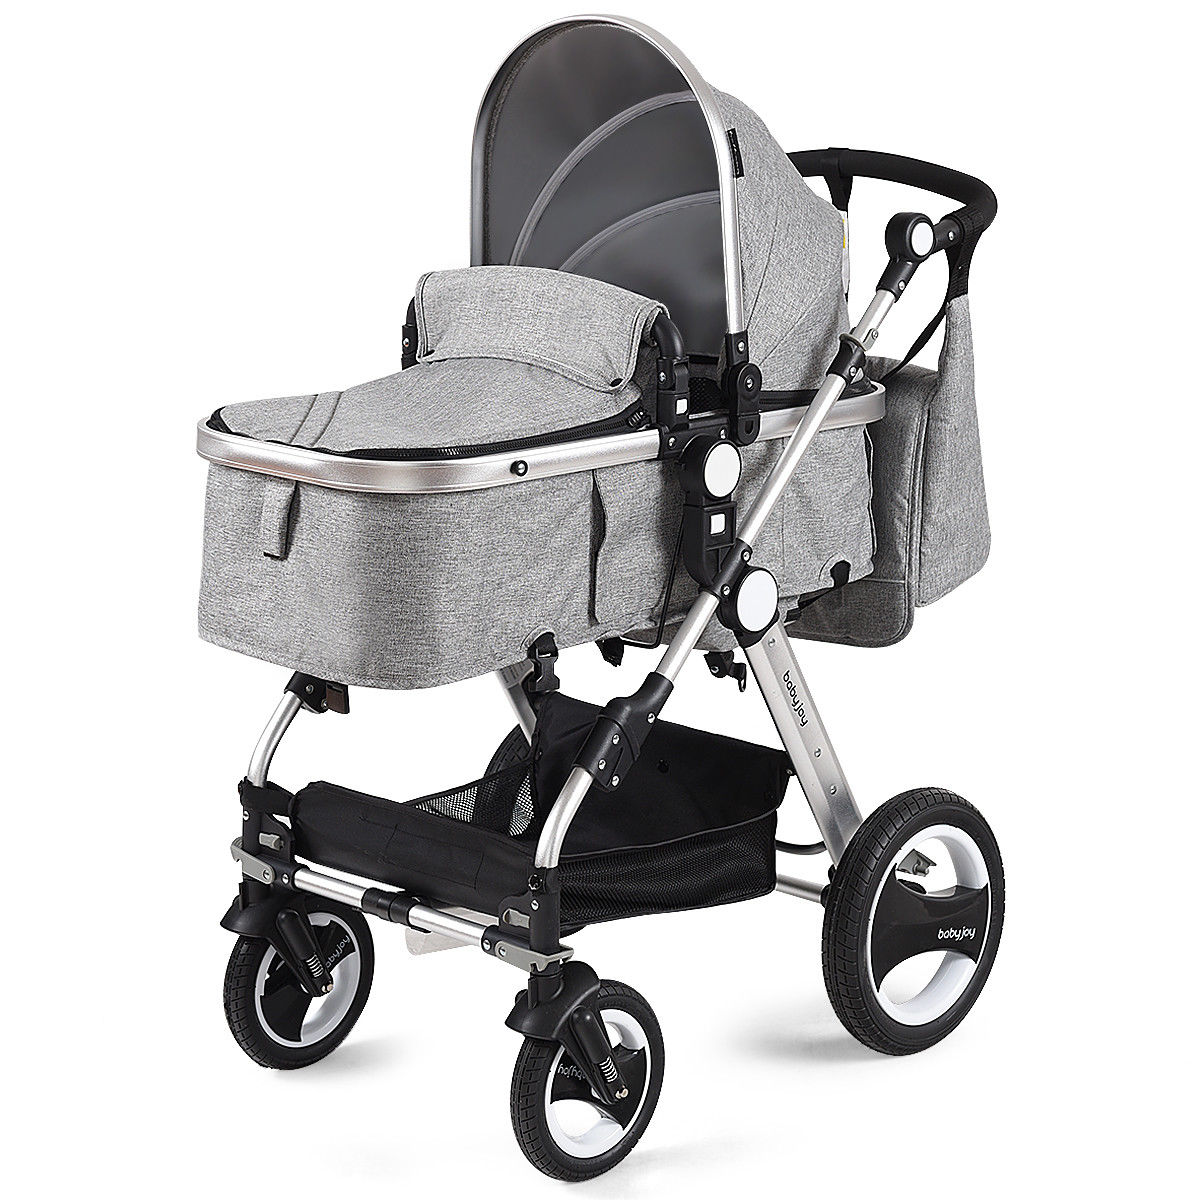 sears travel system